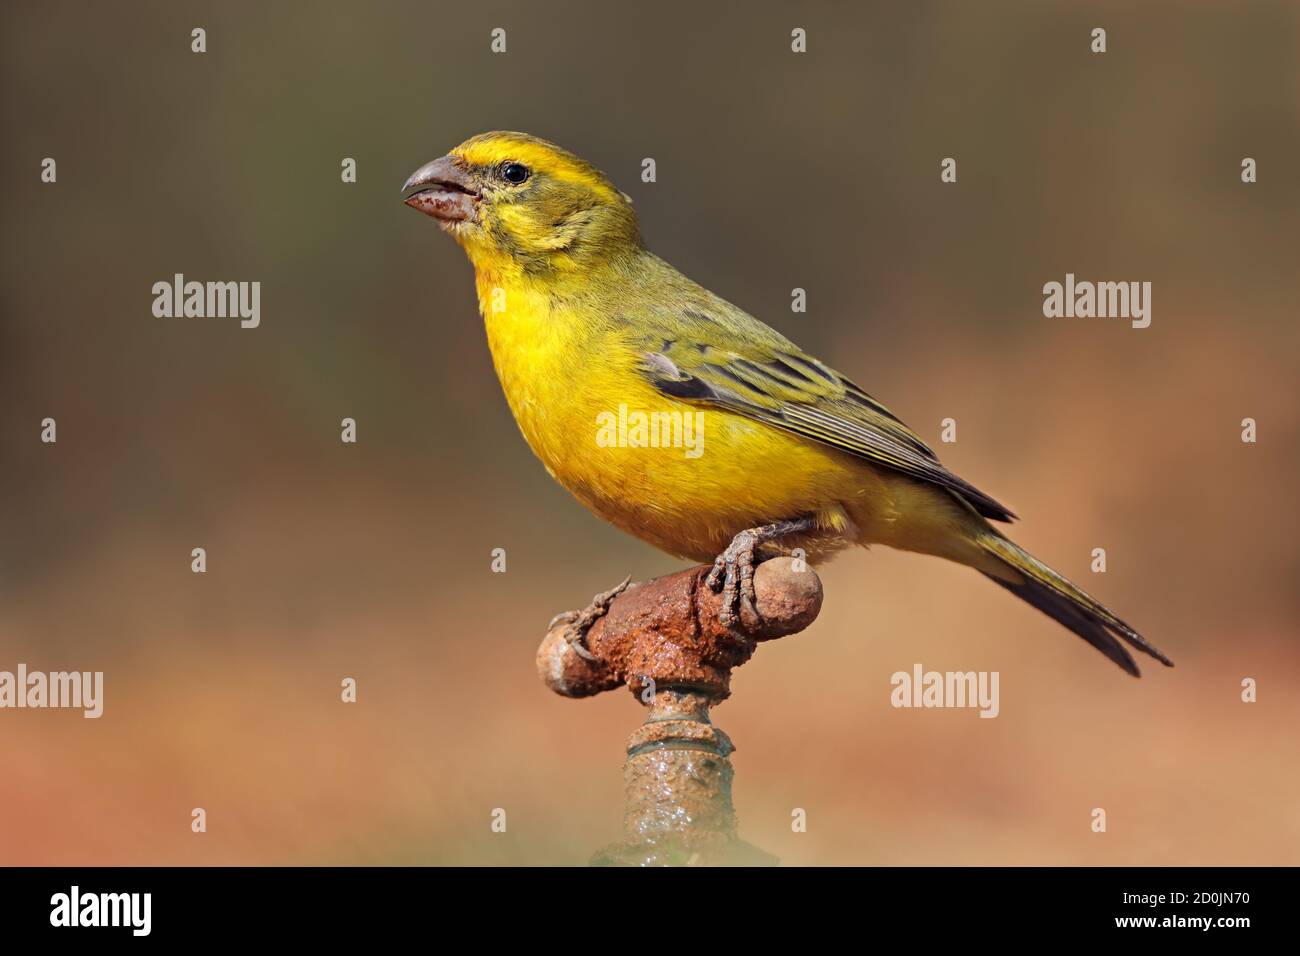 A male yellow canary (Crithagra flaviventris) perched on a tap, South Africa Stock Photo